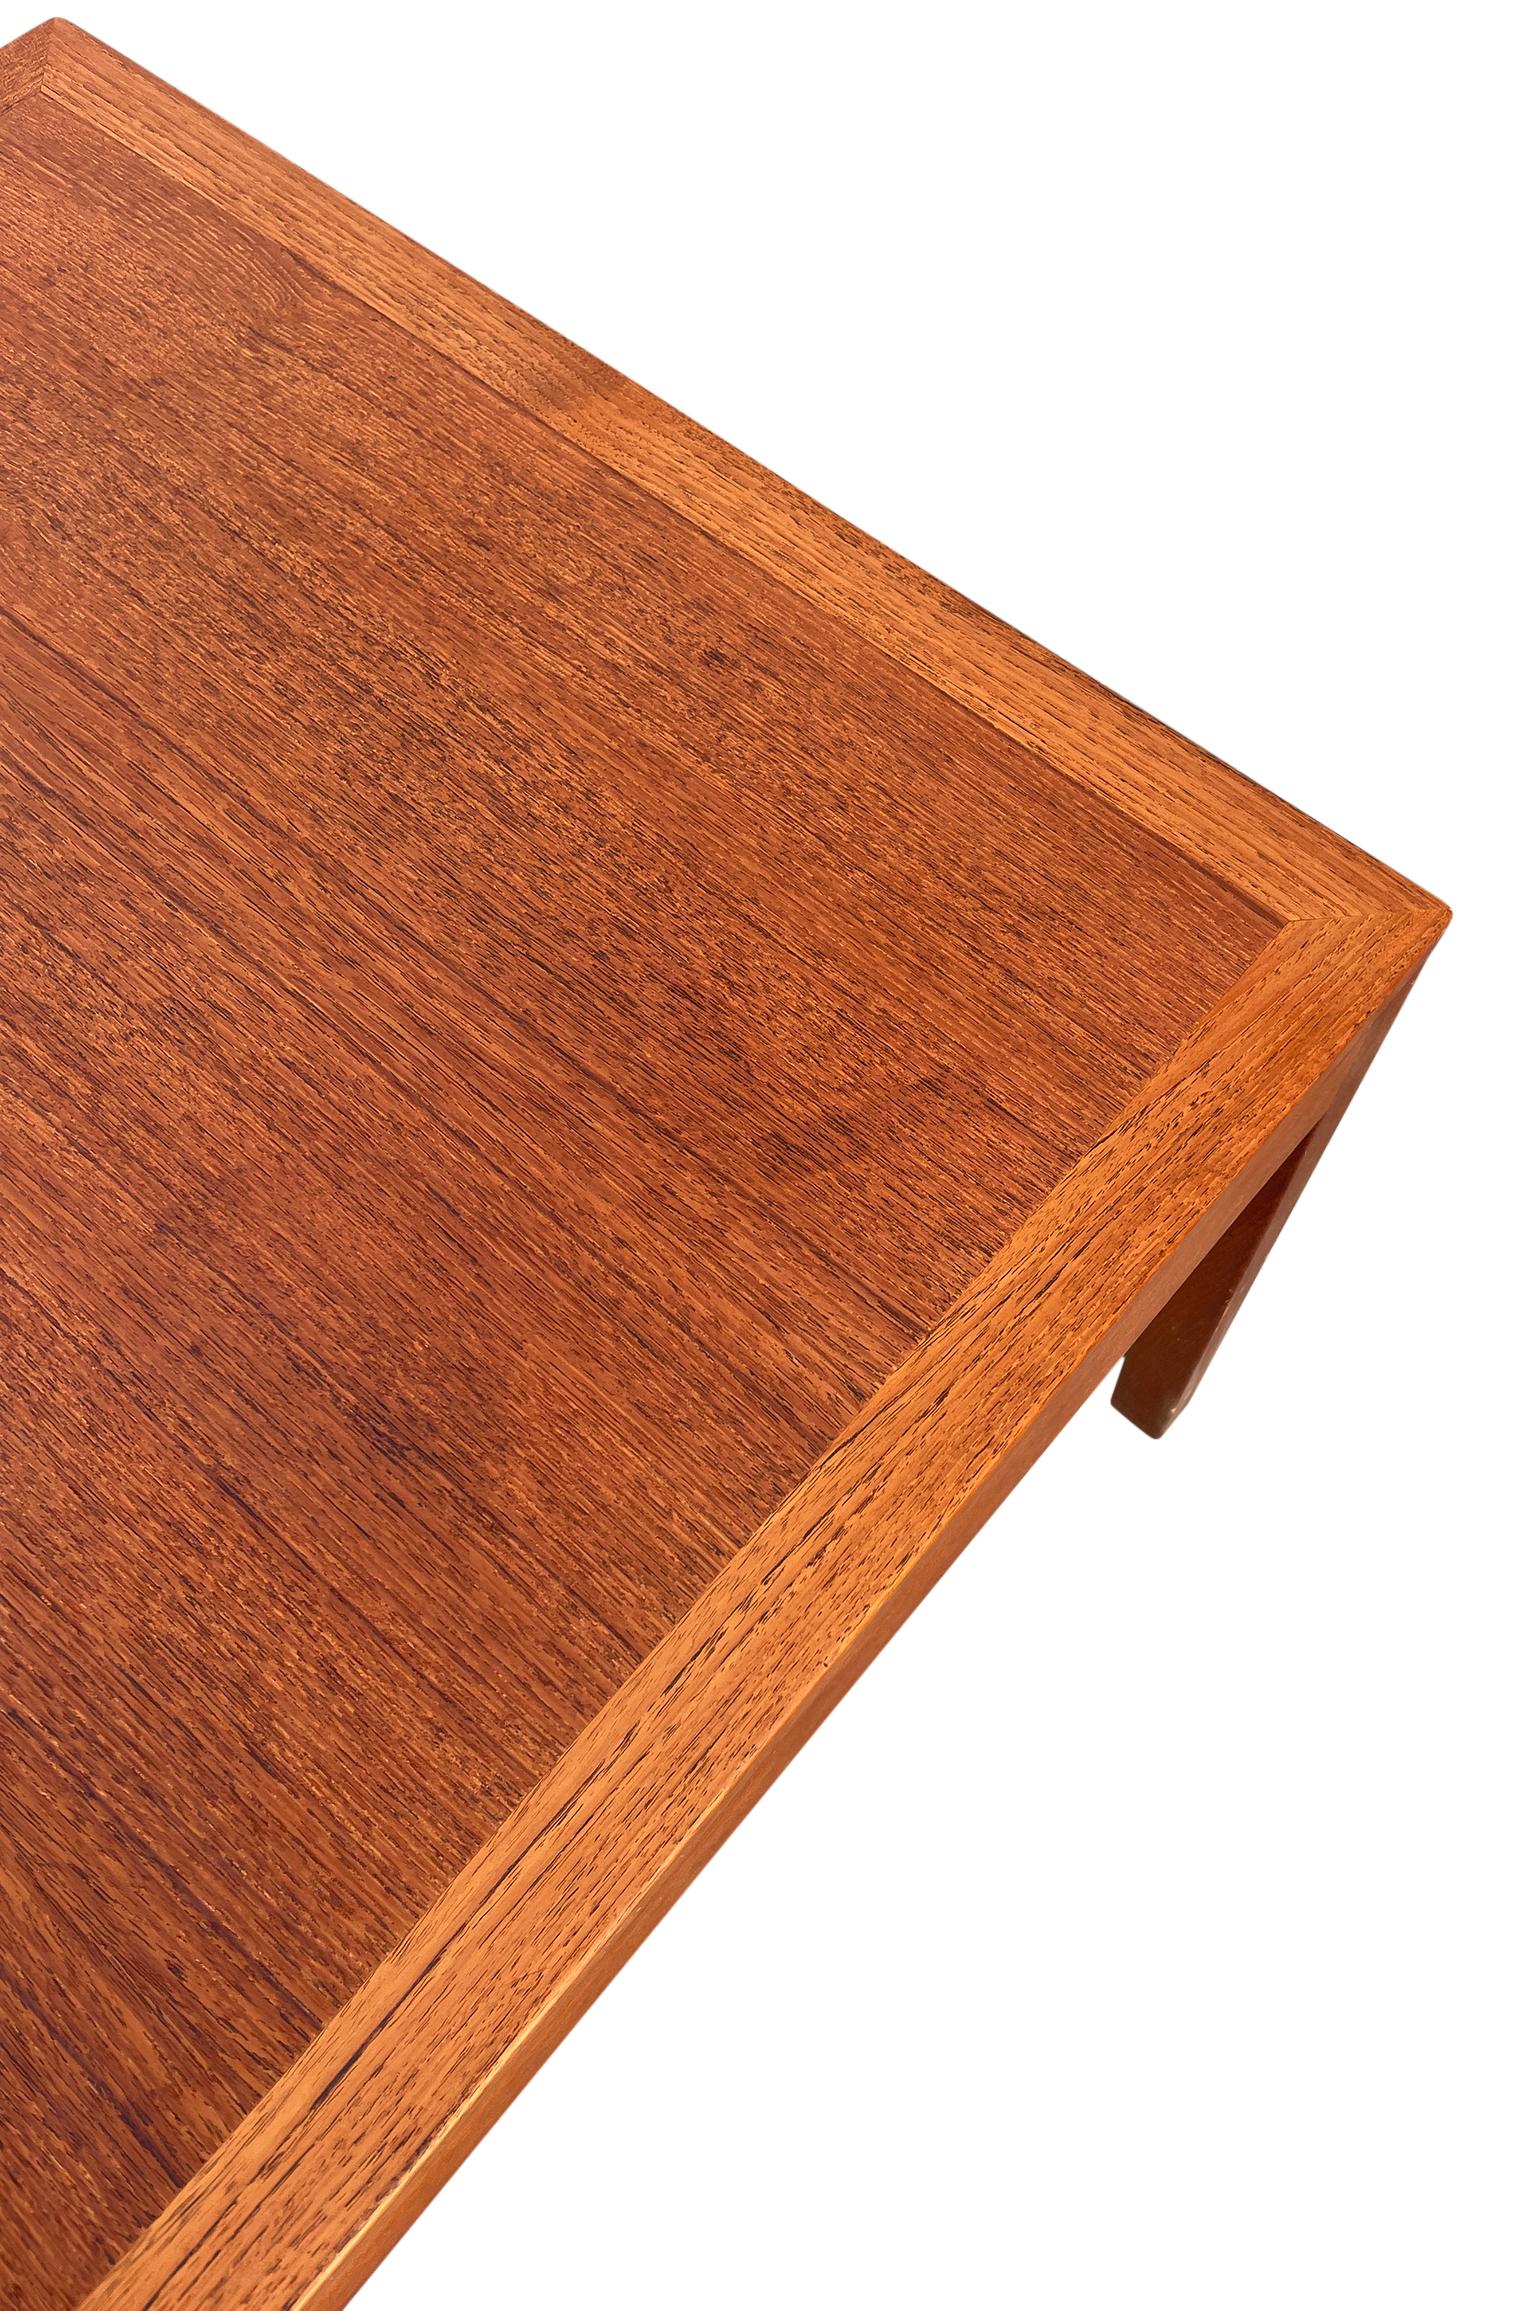 Woodwork Mid-Century Modern Square Danish Coffee Table by Børge Mogensen For Sale